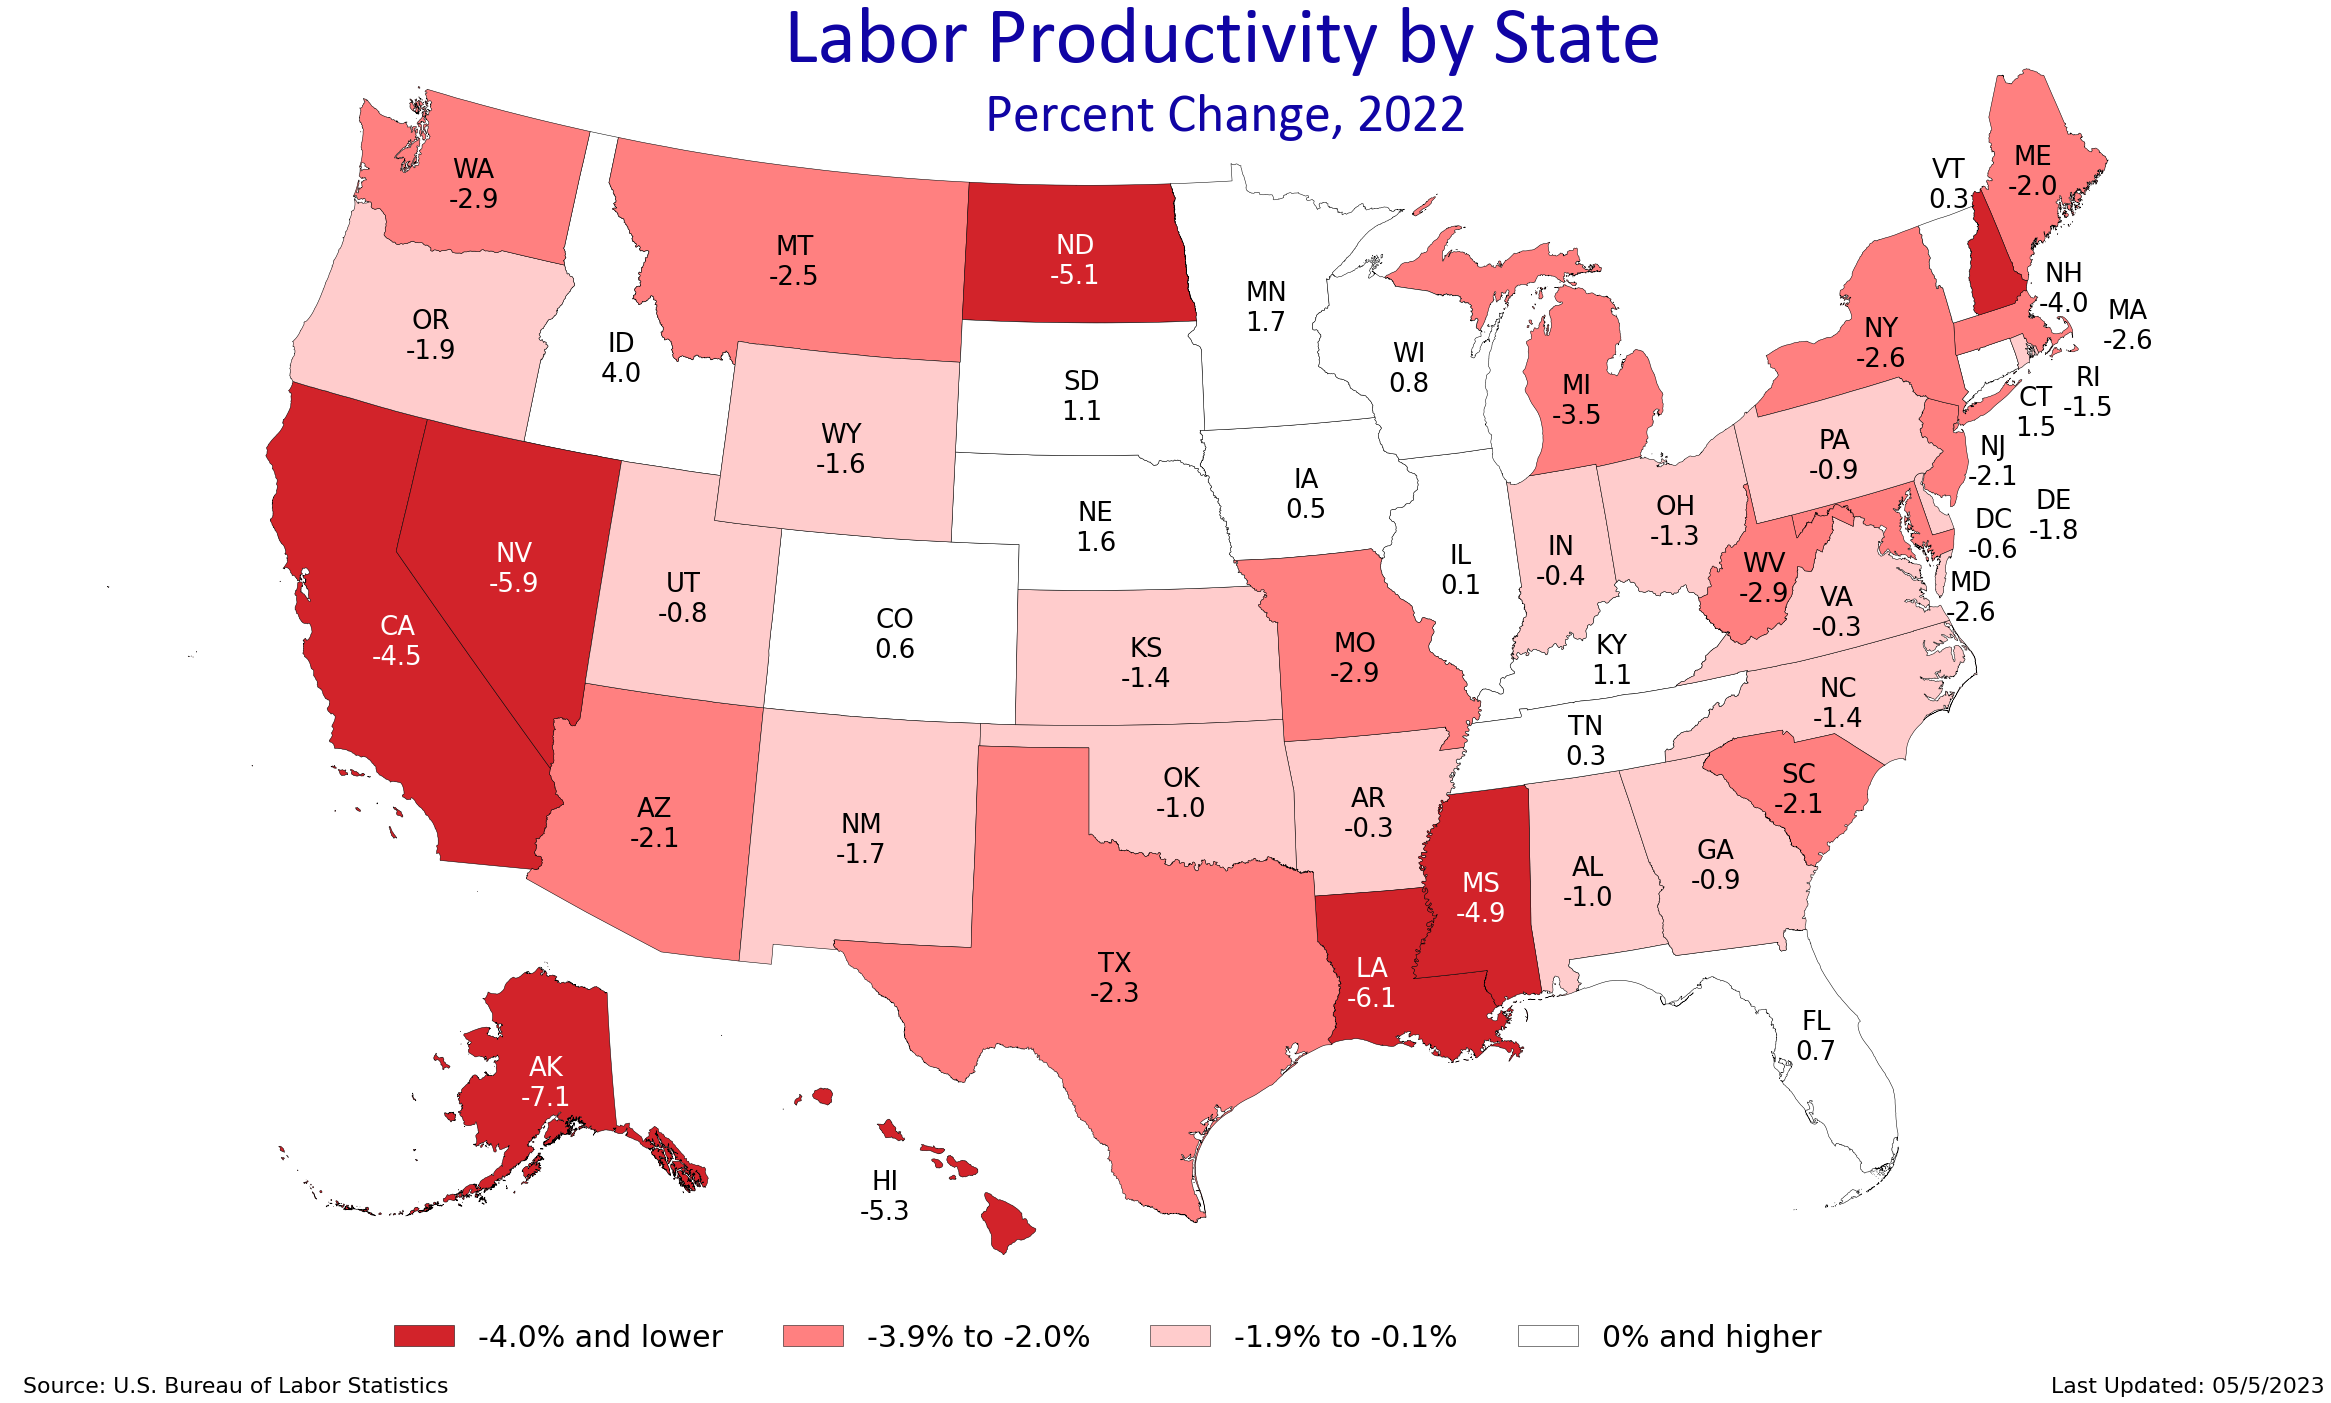 State map of labor productivity, 1-year percent change